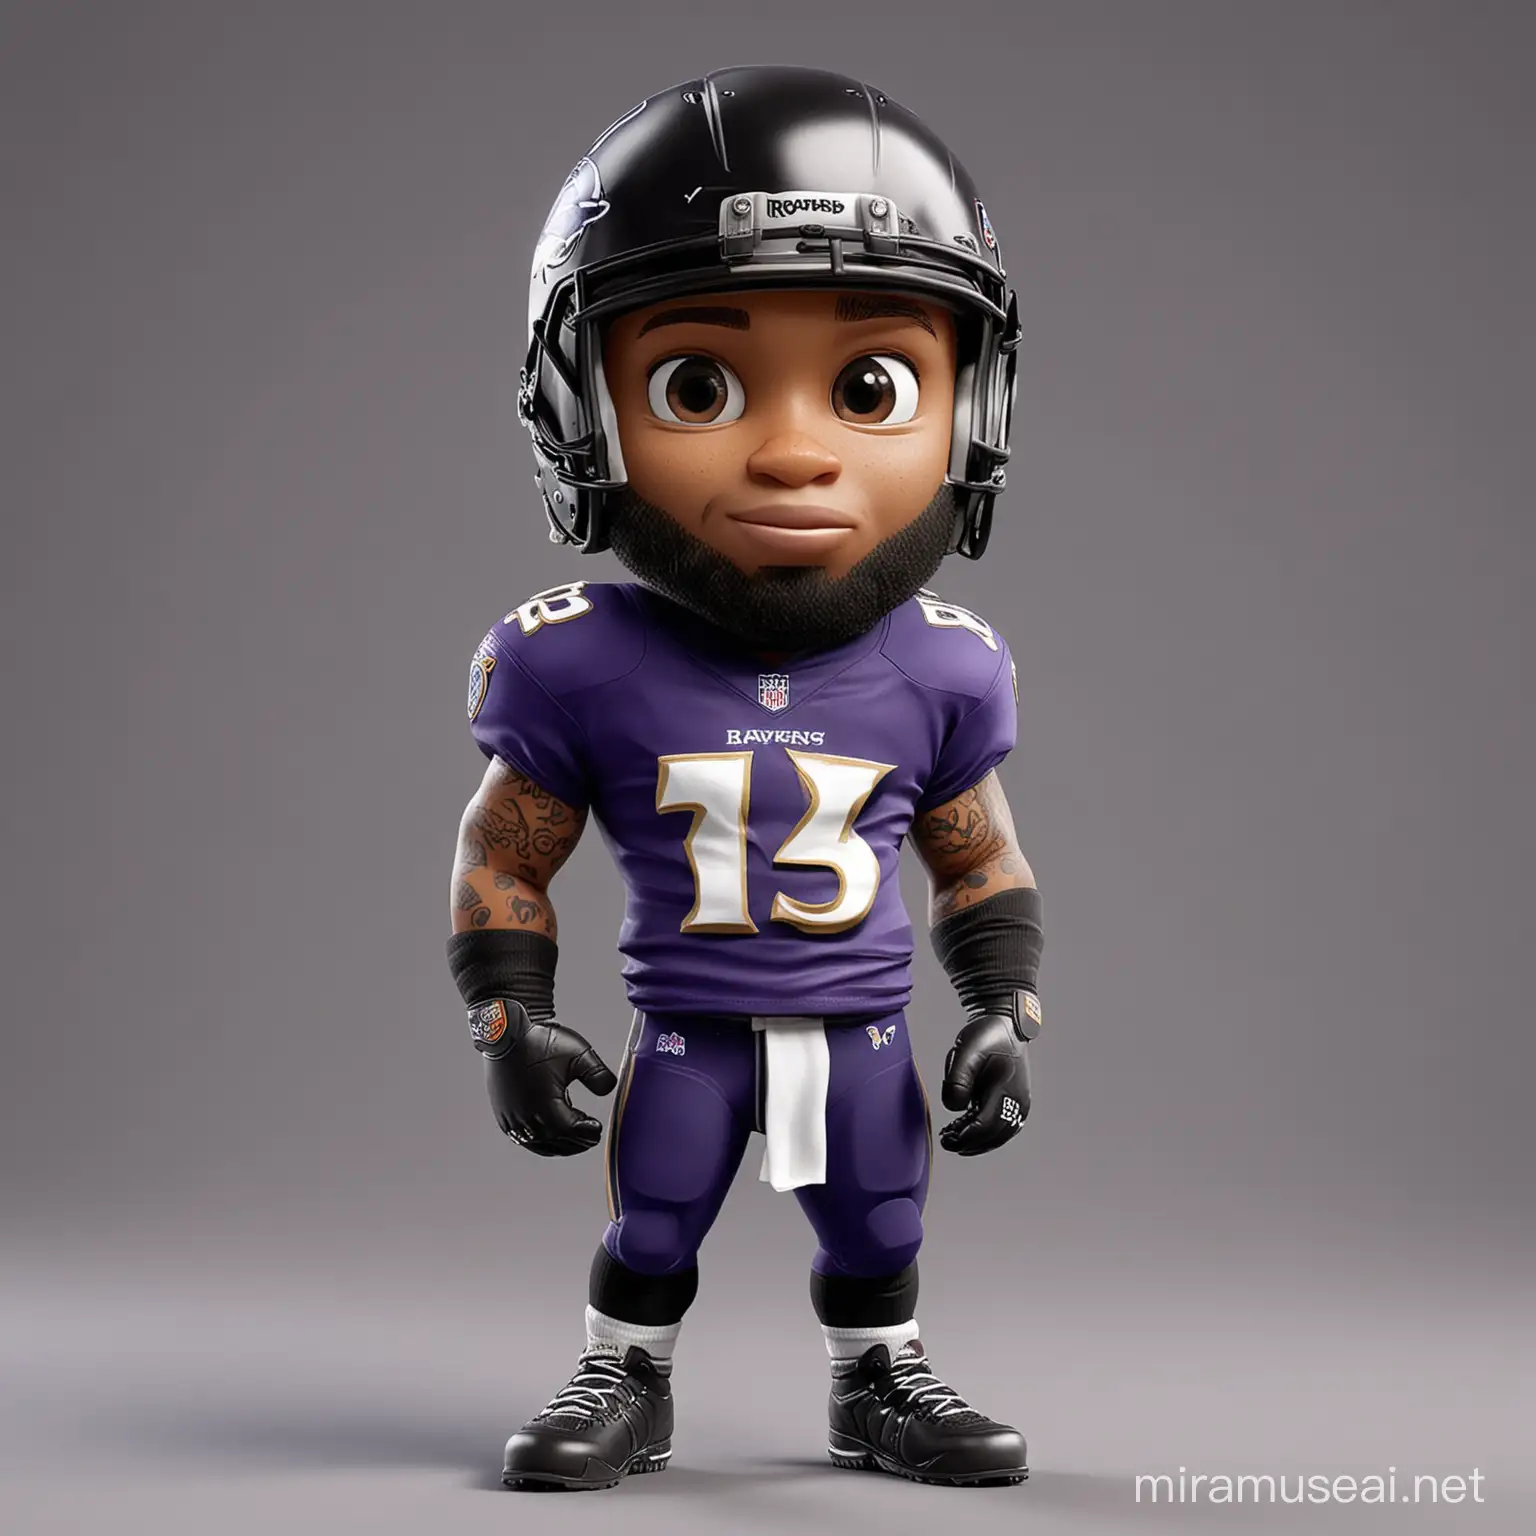 a cute 3d rendered nfl player looks like odell beckham jr. wearing helmet and baltimore ravens kit, standing pose, cartoon style